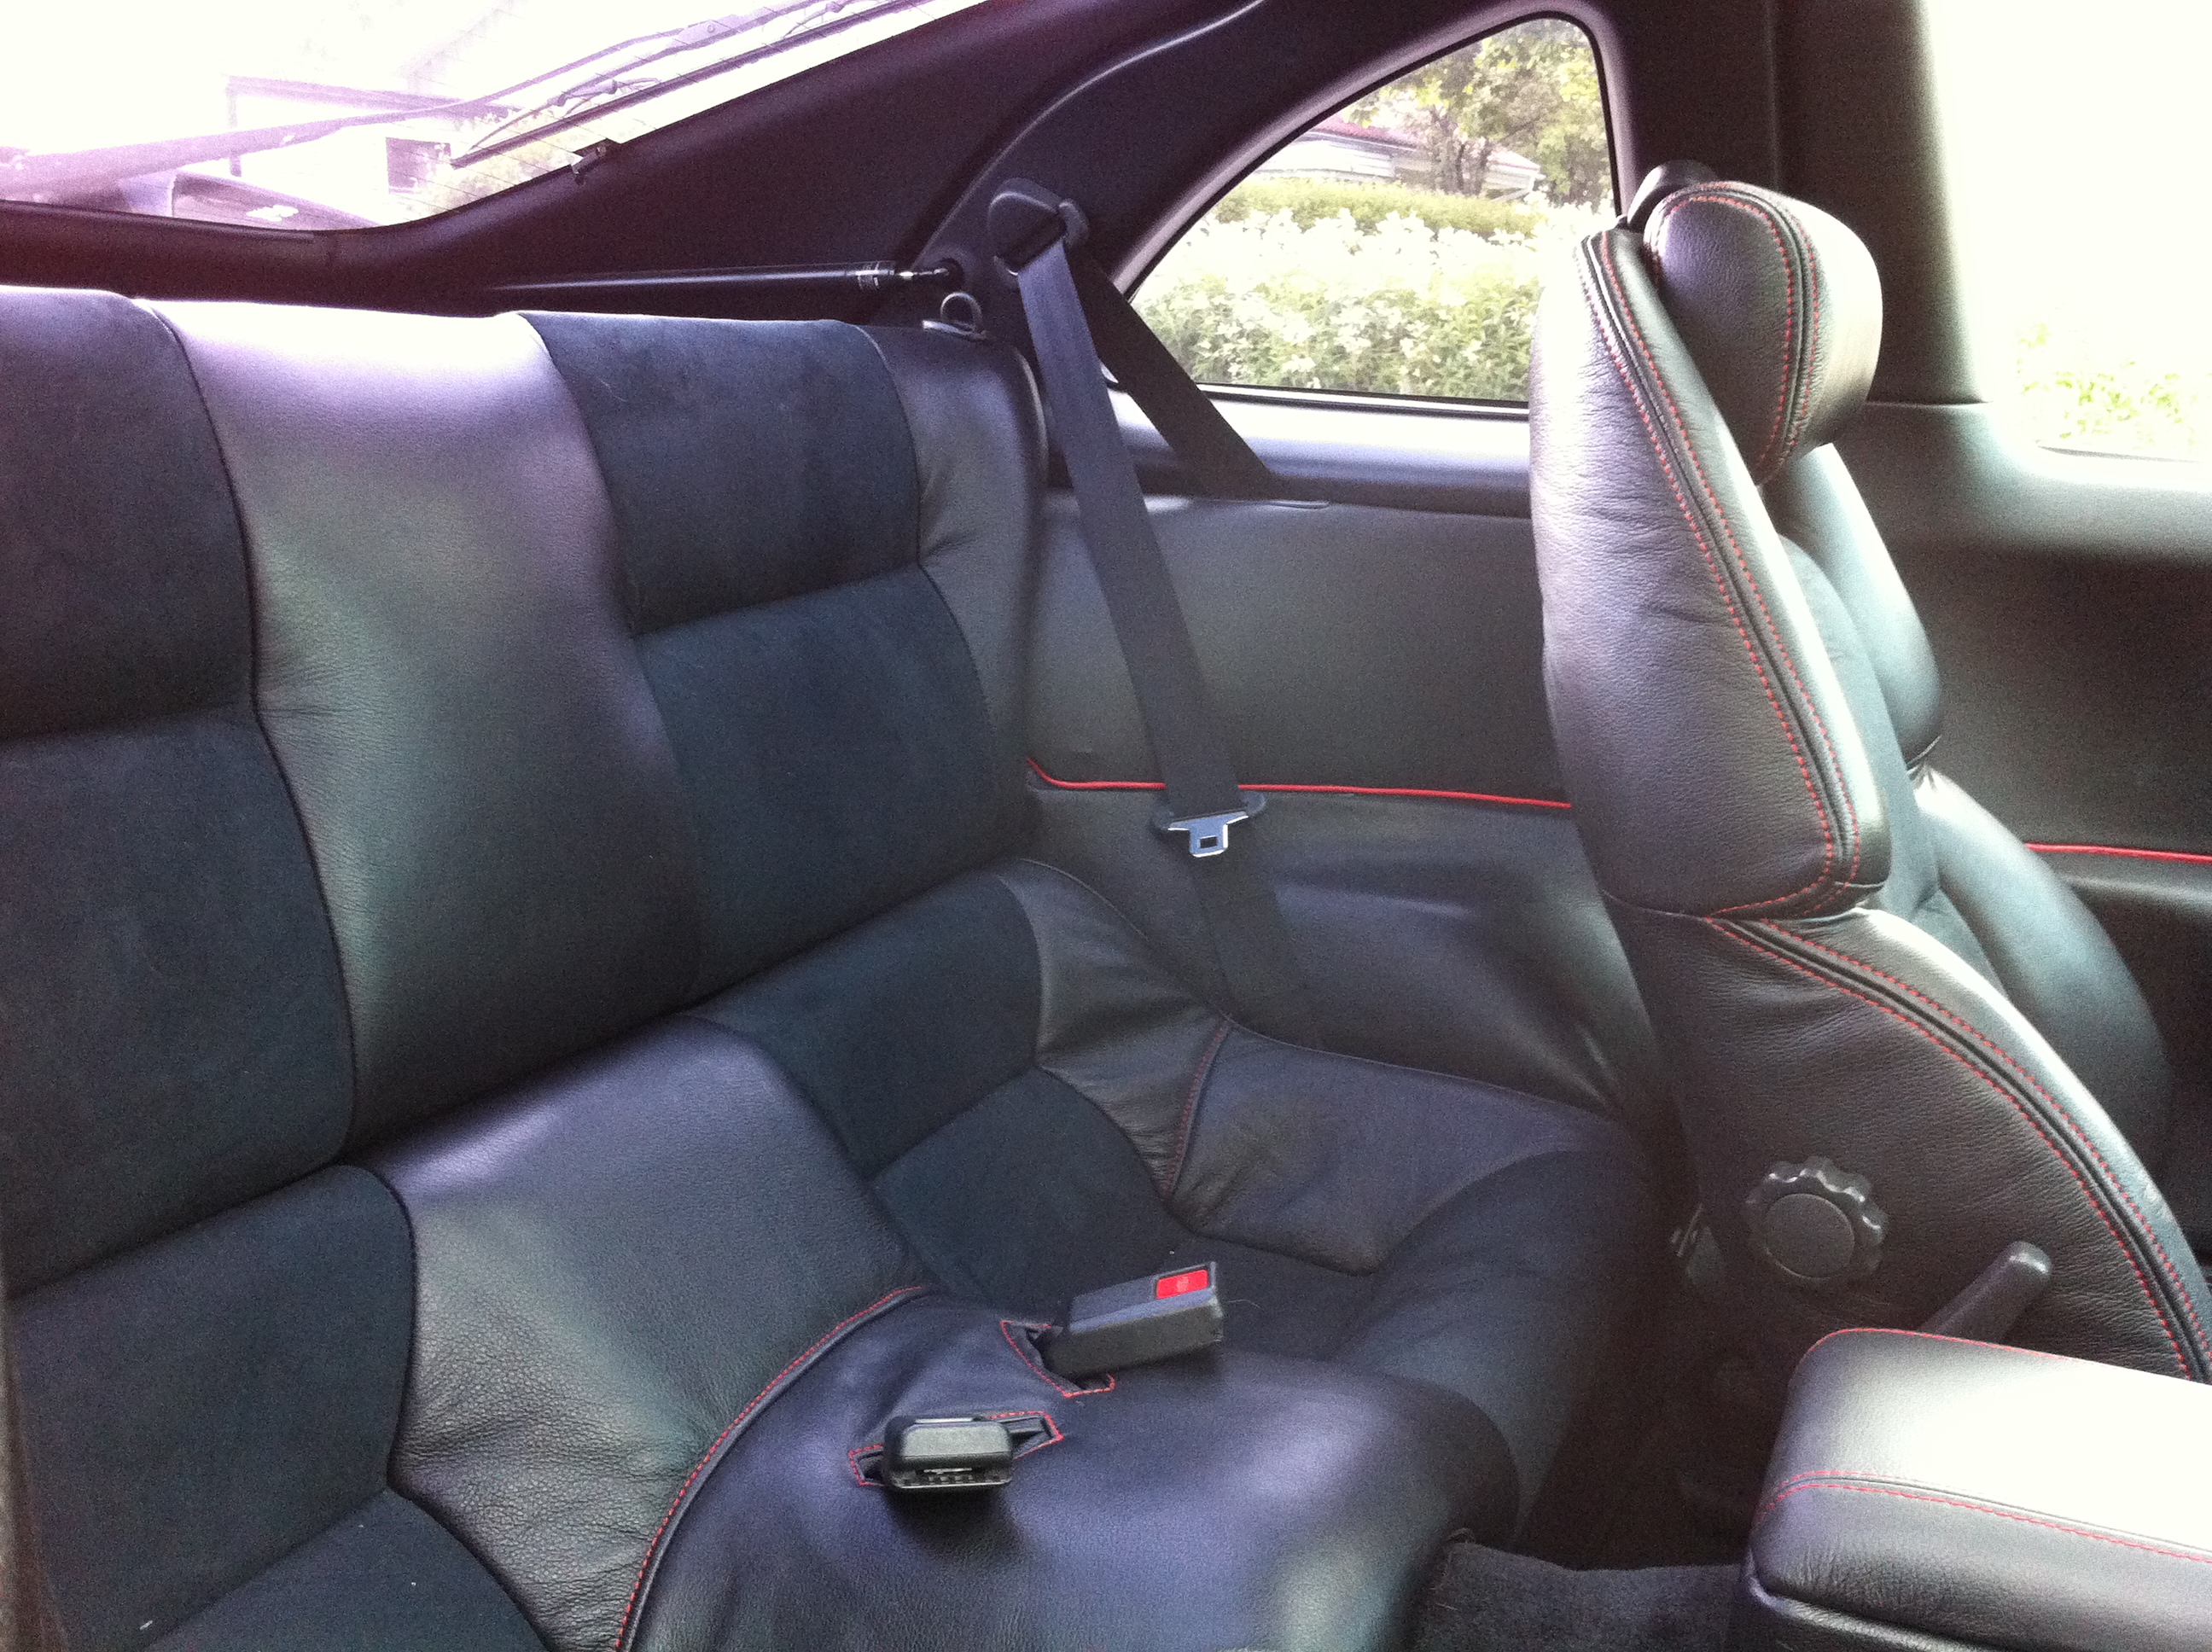 1991 Nissan 300zx seat covers #6